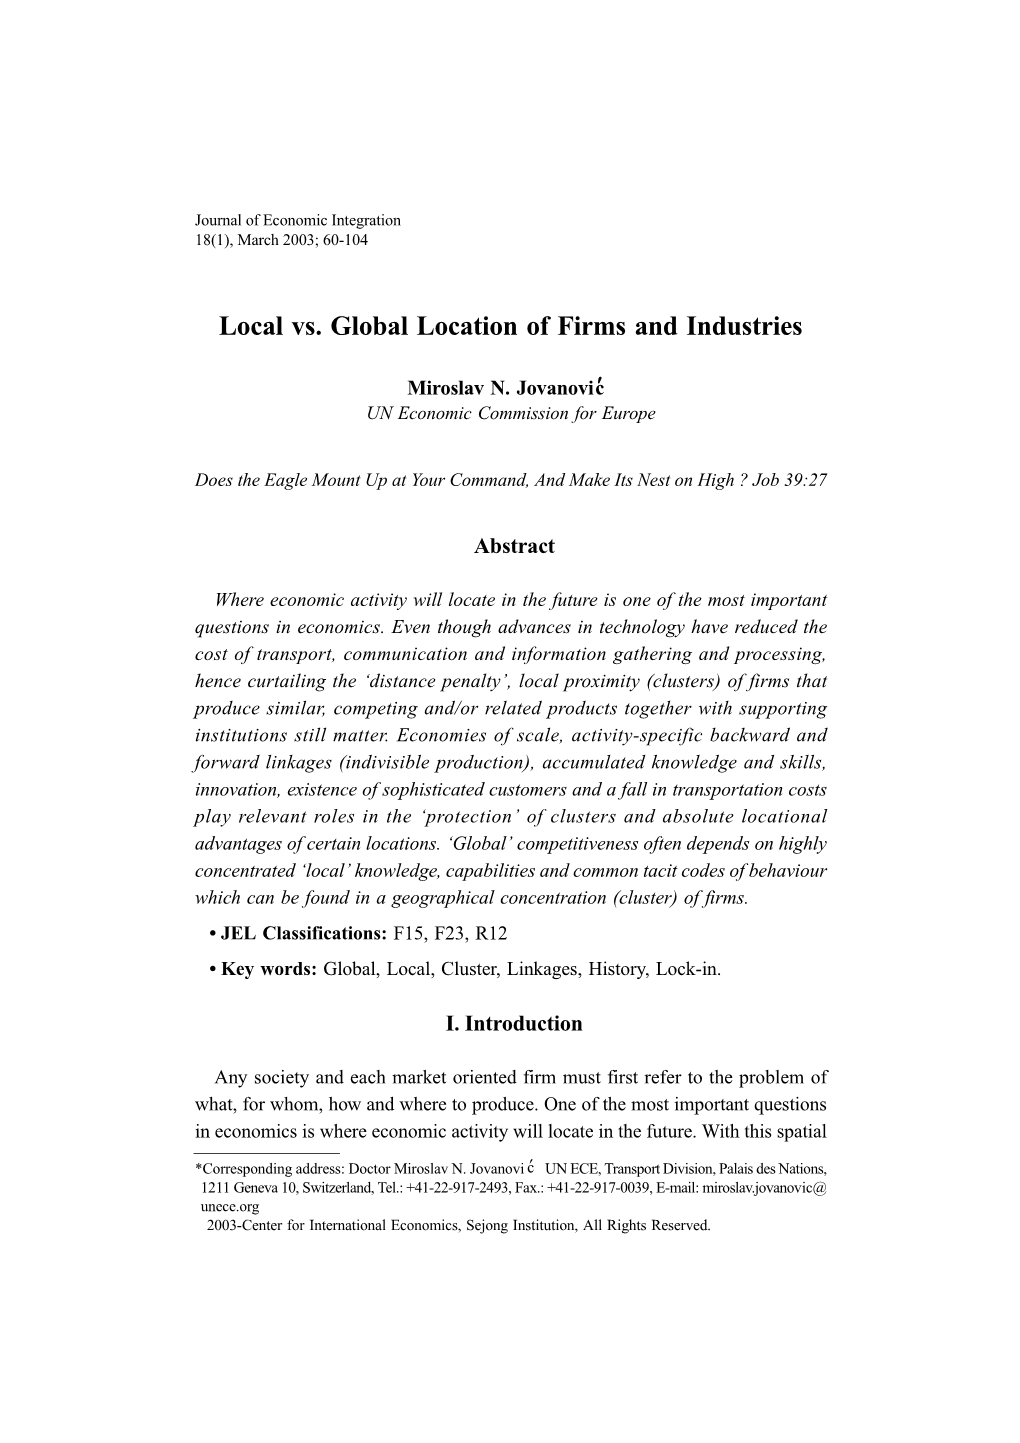 Local Vs. Global Location of Firms and Industries